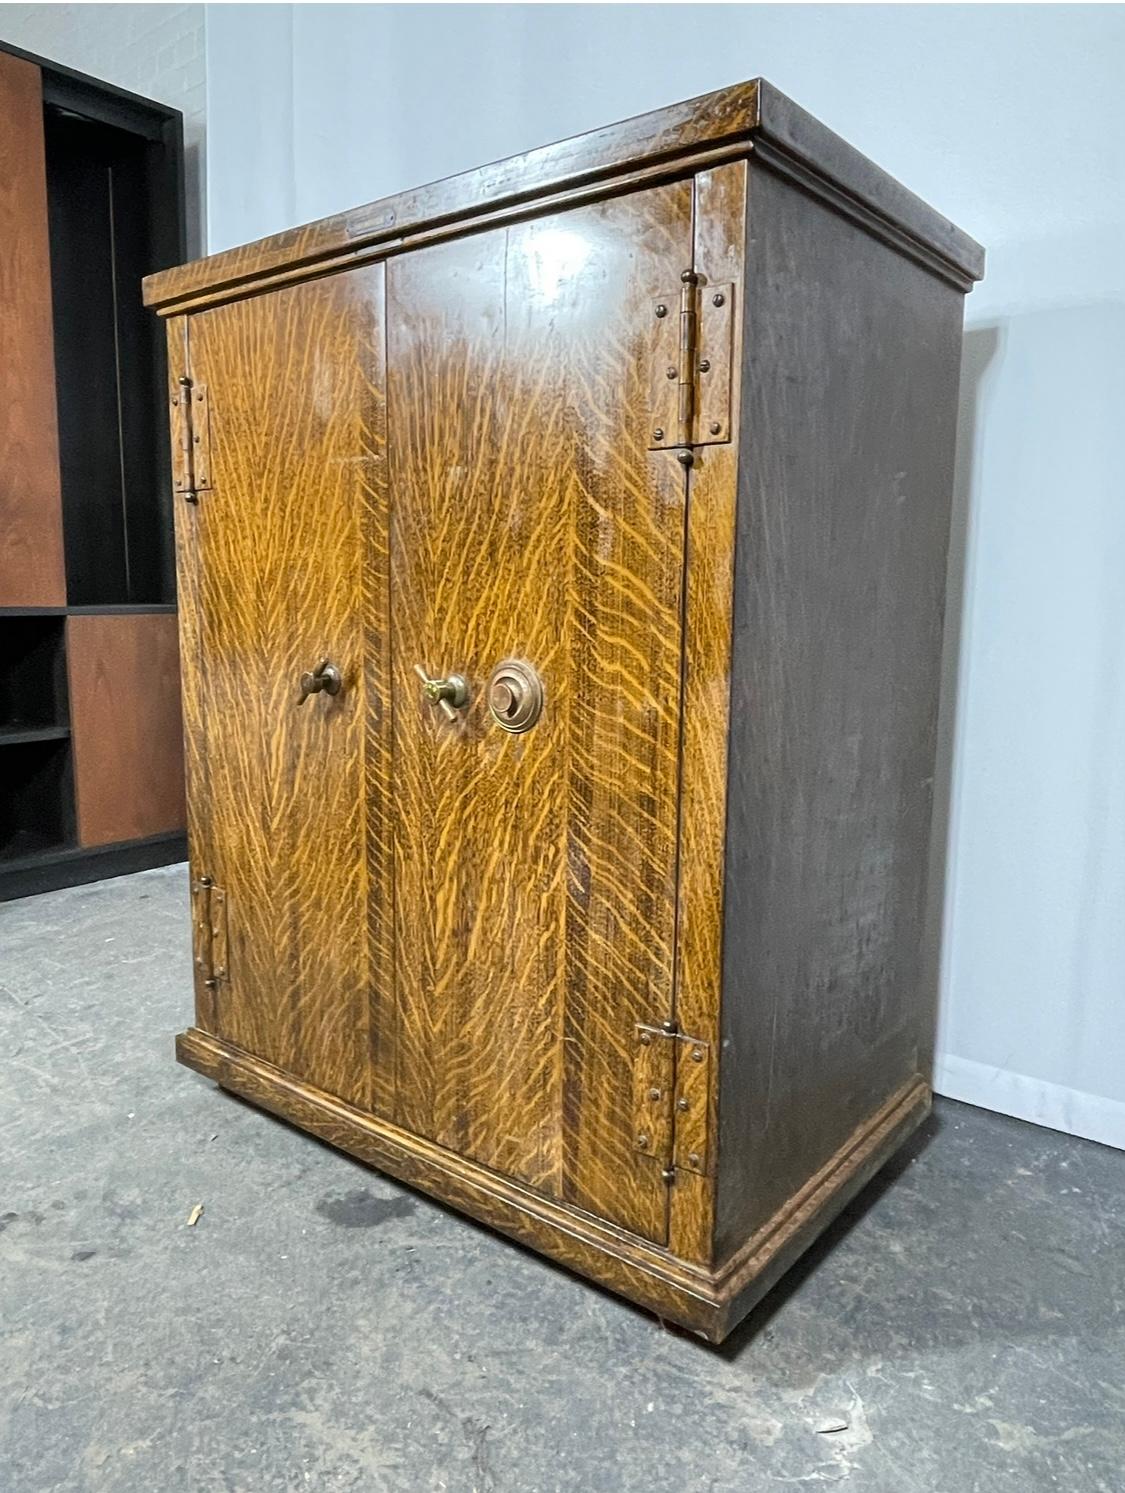 Early 20th Century Large Industrial  Faux Wood Grain Metal Safe, dry bar, storage  For Sale